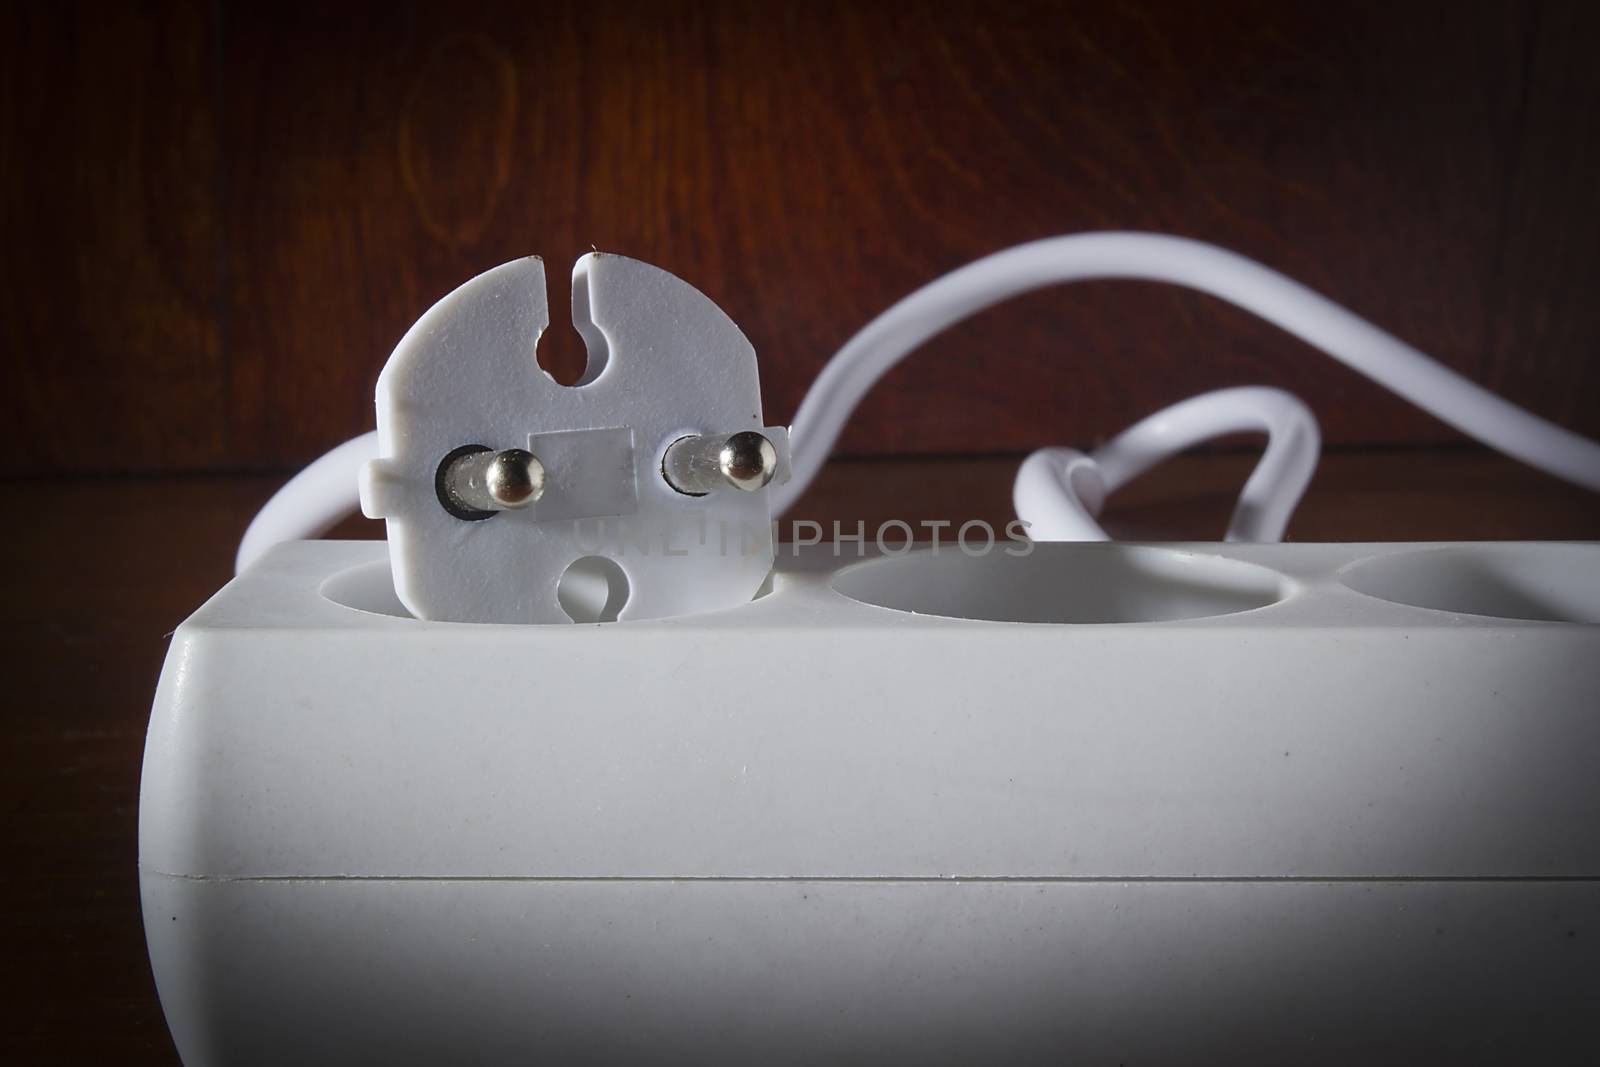 White extension cord on a wooden table